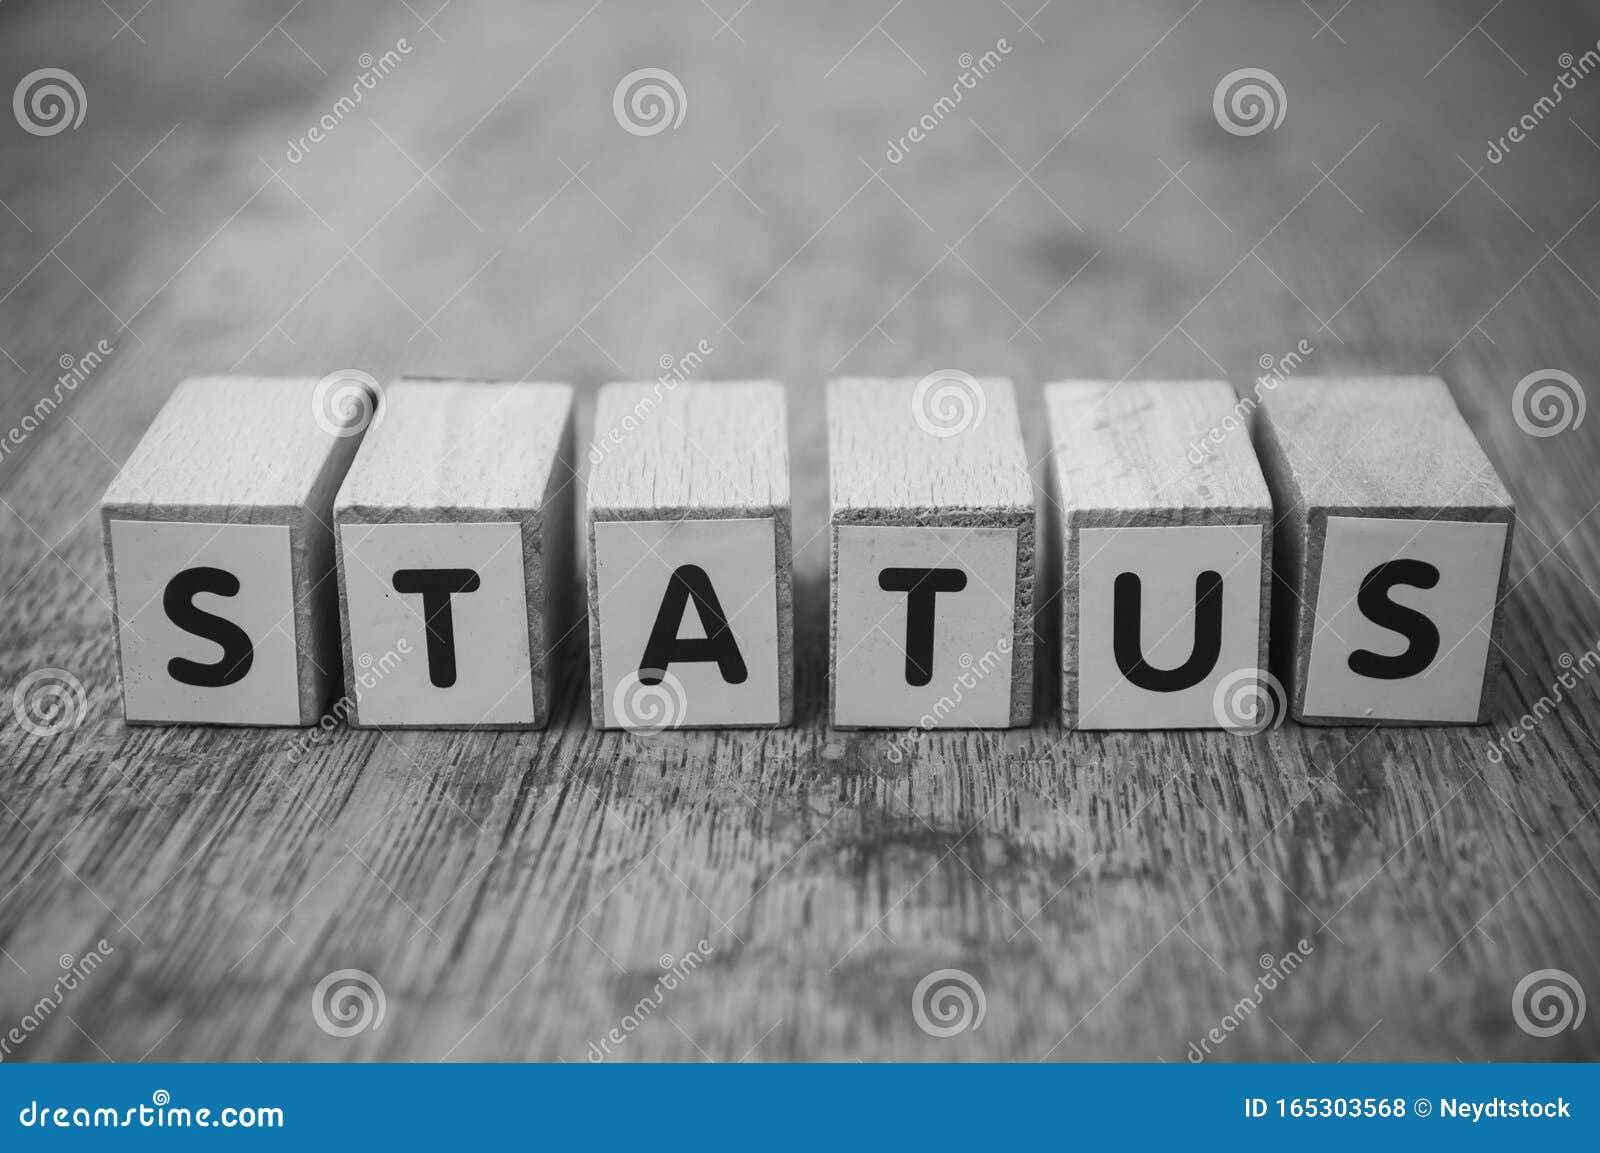 wooden word on wooden table background concept  - status